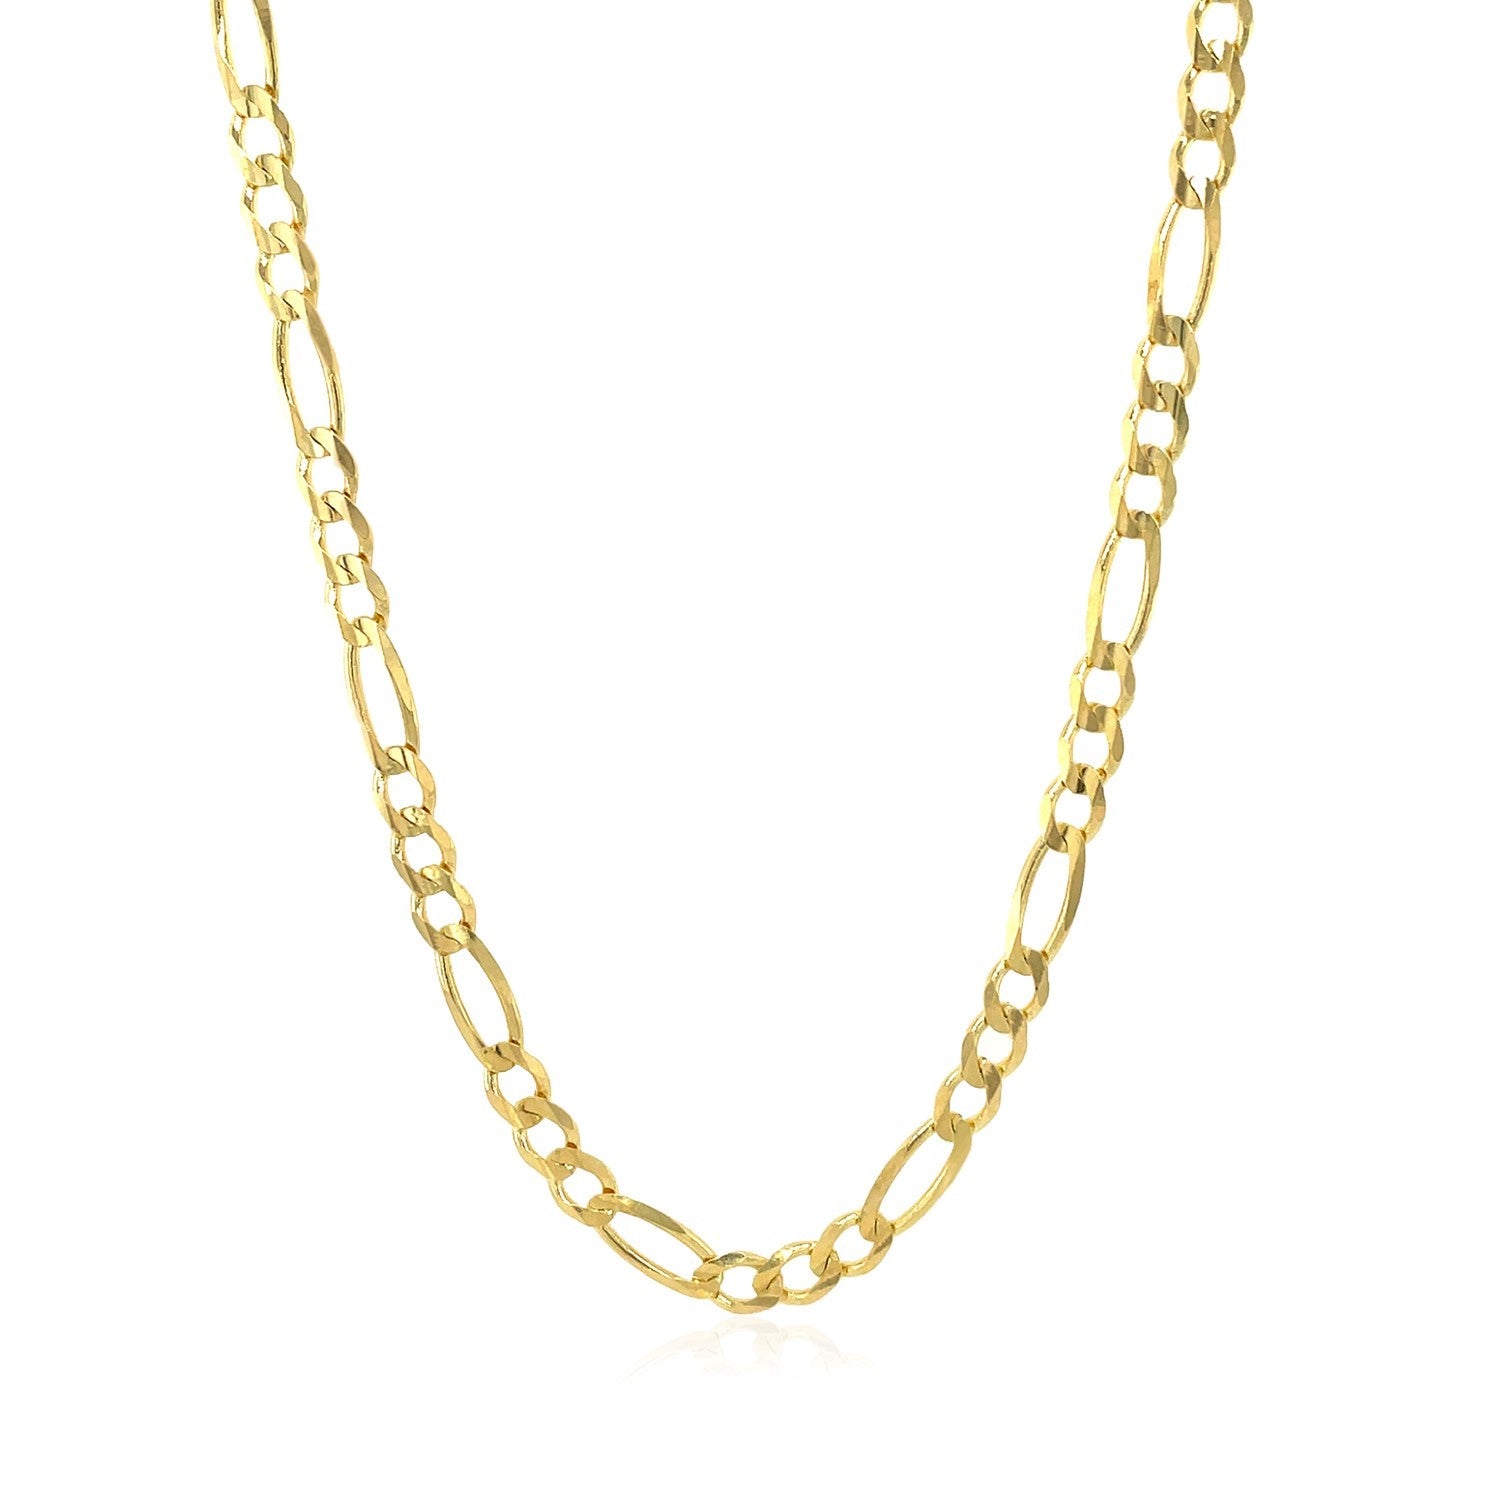 10K Yellow Gold Solid Figaro Chain 3 70 Mm 25044-2